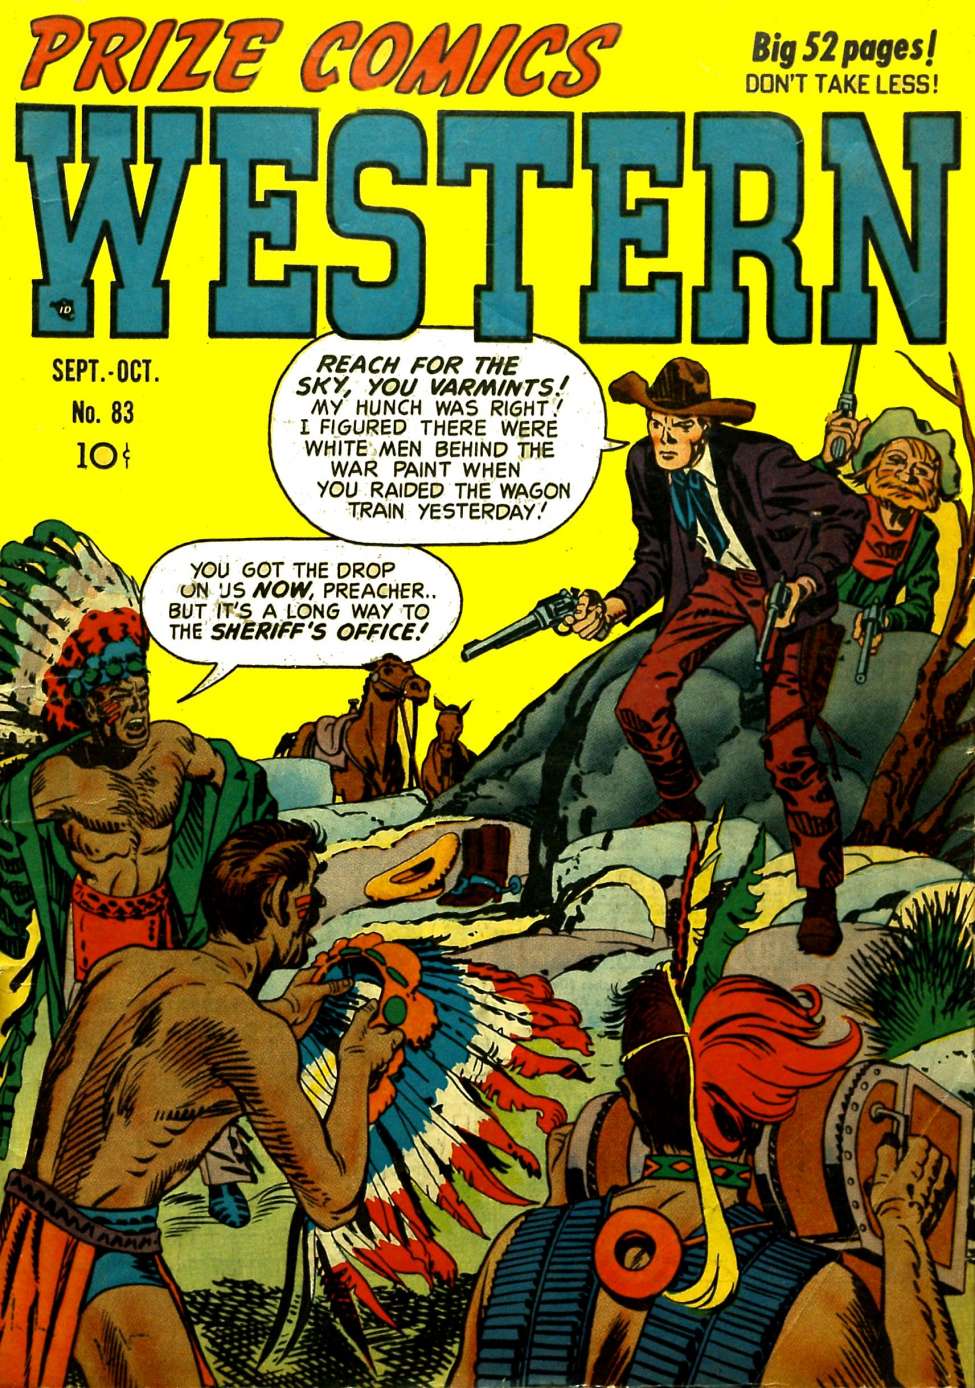 Book Cover For Prize Comics Western 83